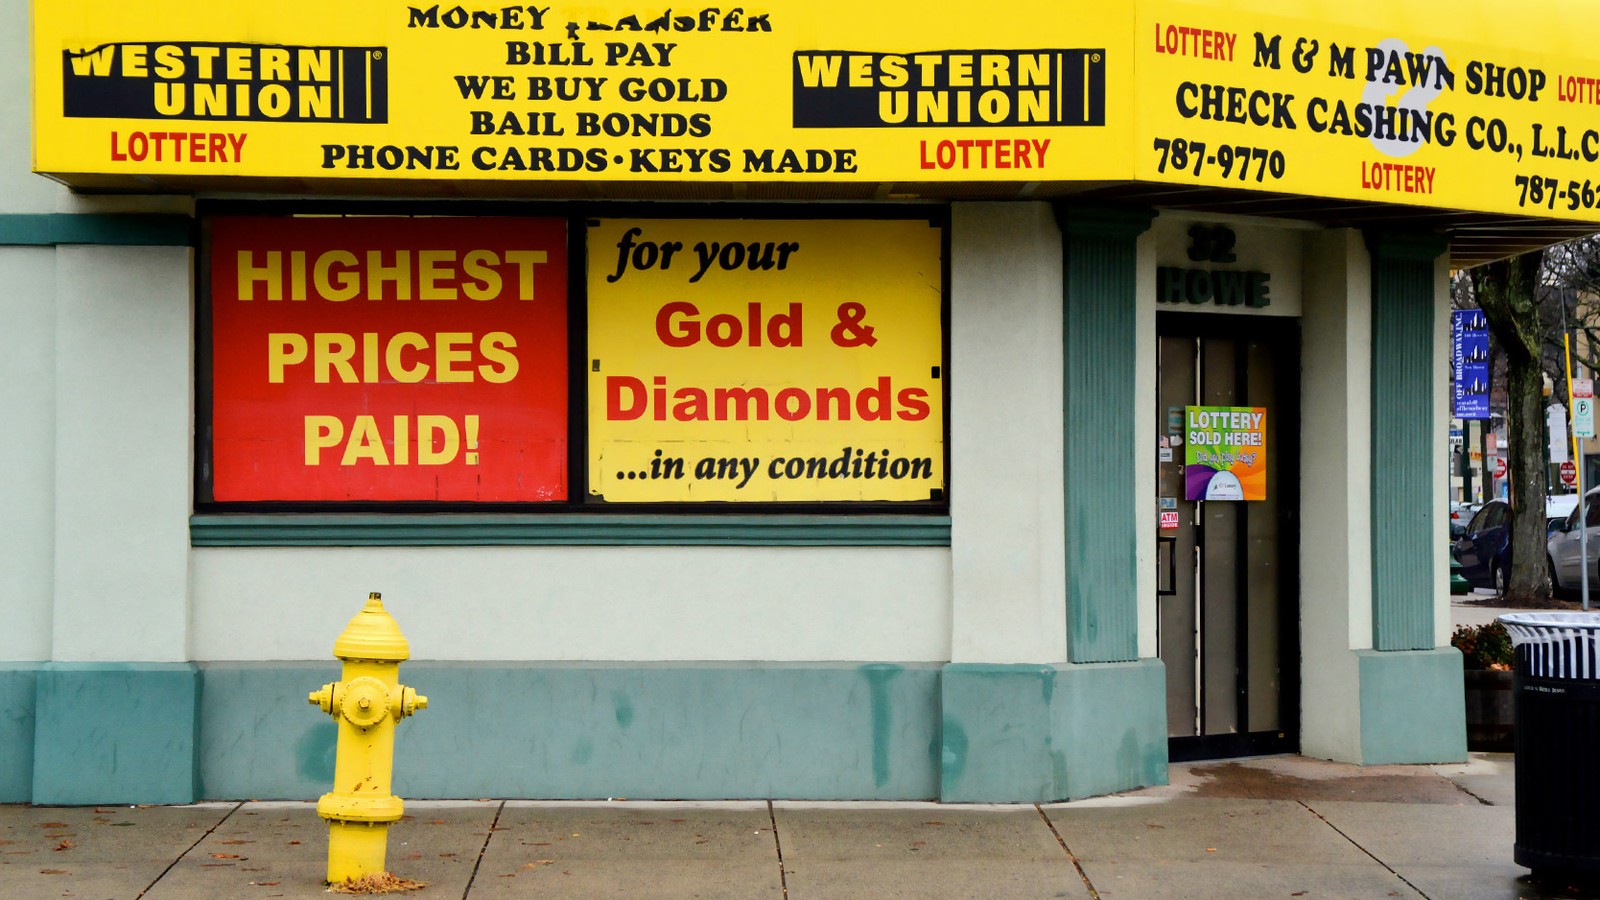 Several theories on how pawnbroker symbol came to be - American